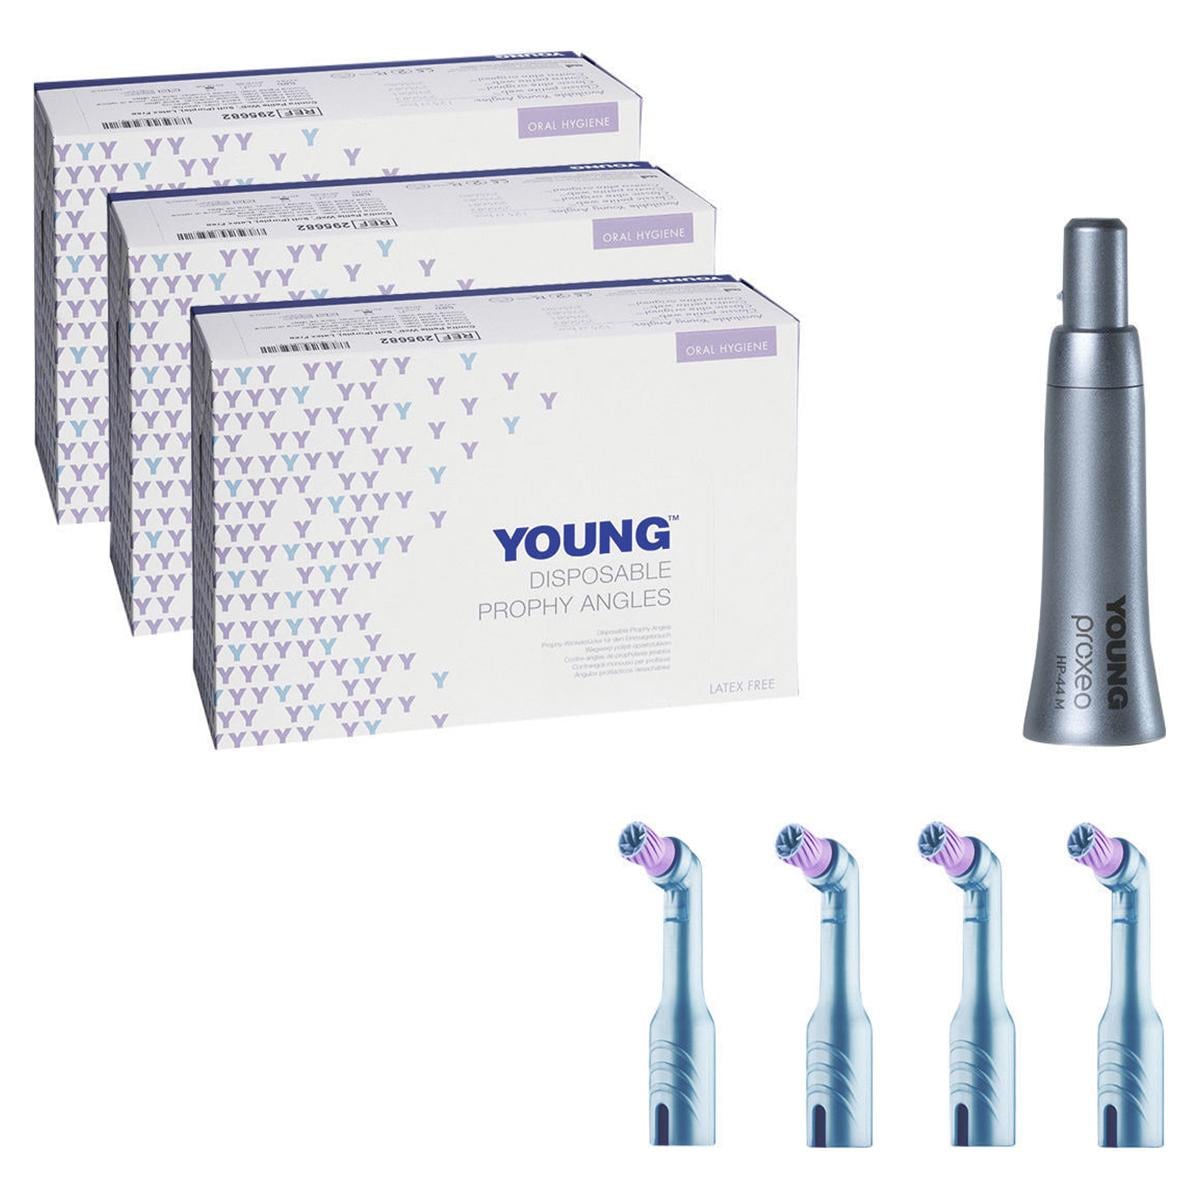 Disposable Prophy Angles Contra Elite Soft Starter Kit - YDNT01